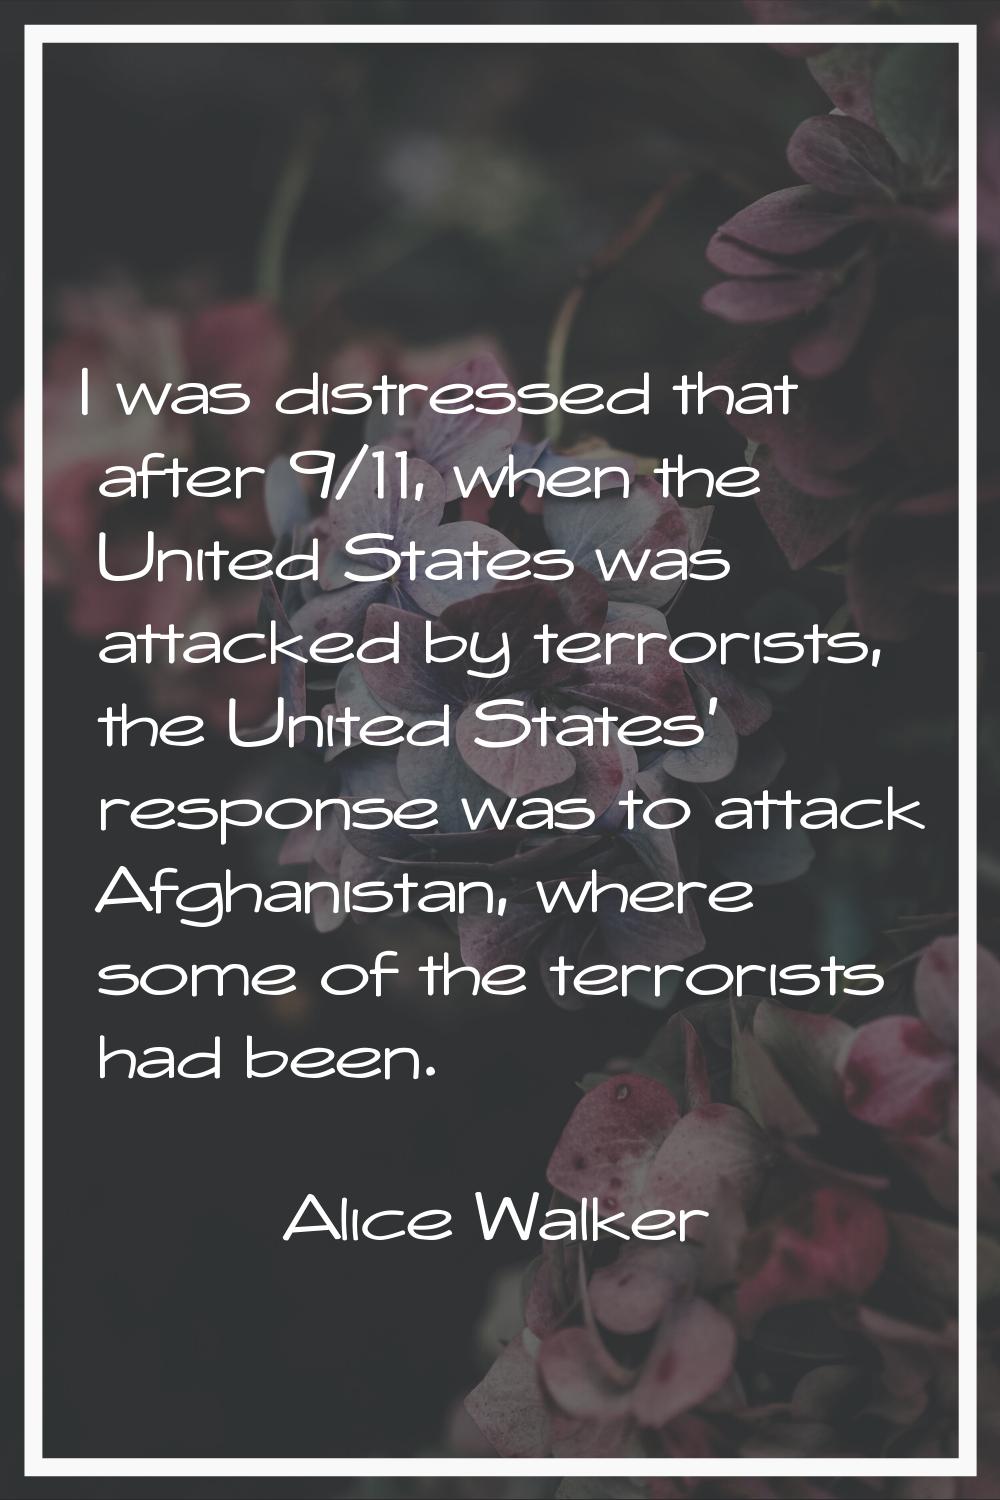 I was distressed that after 9/11, when the United States was attacked by terrorists, the United Sta